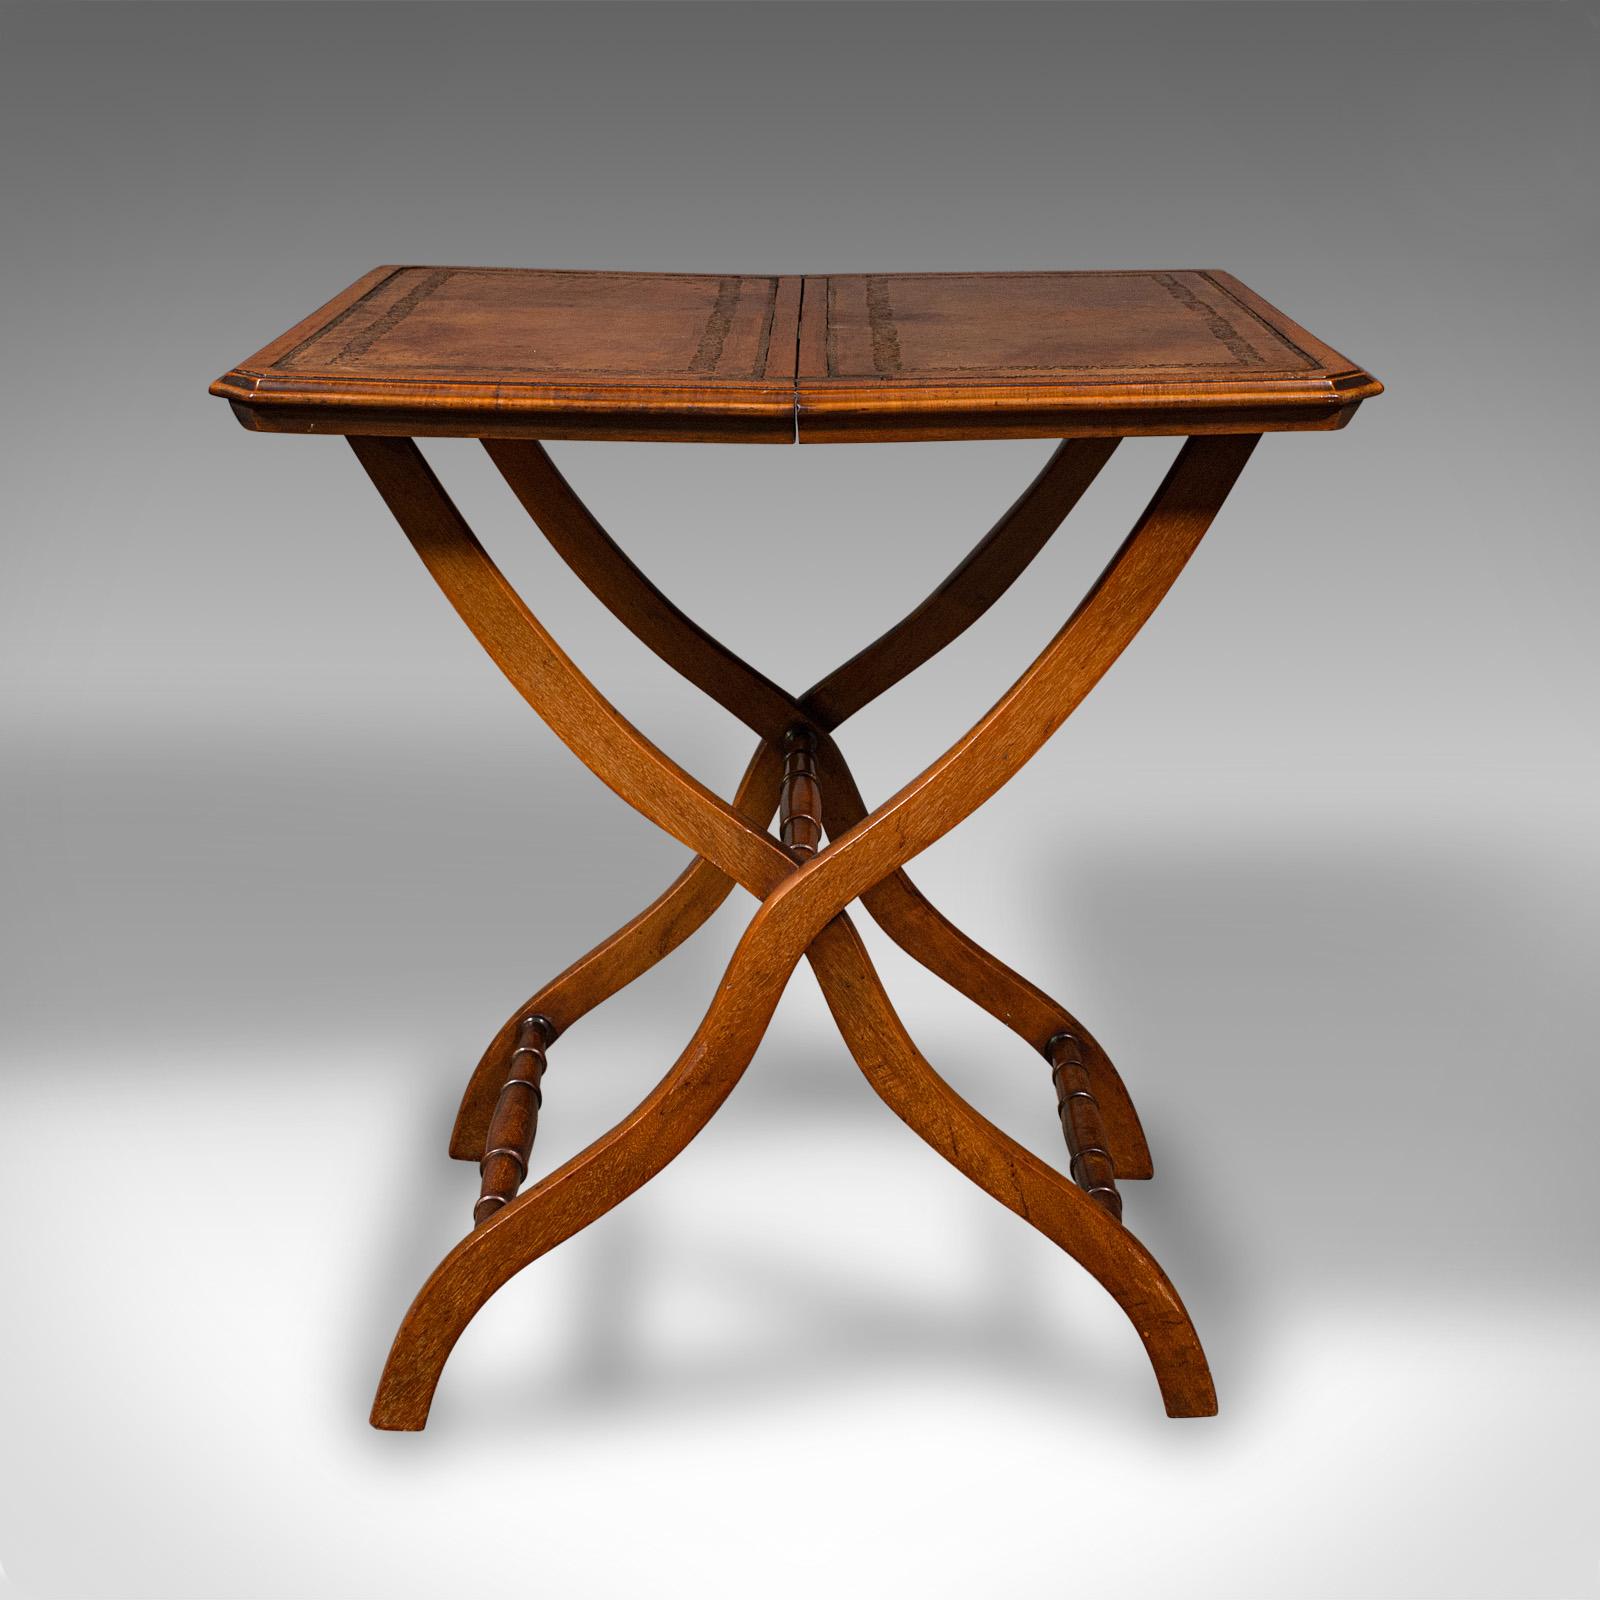 19th Century Antique Folding Writing Table, English, Walnut, Side, Serving, Victorian, C.1880